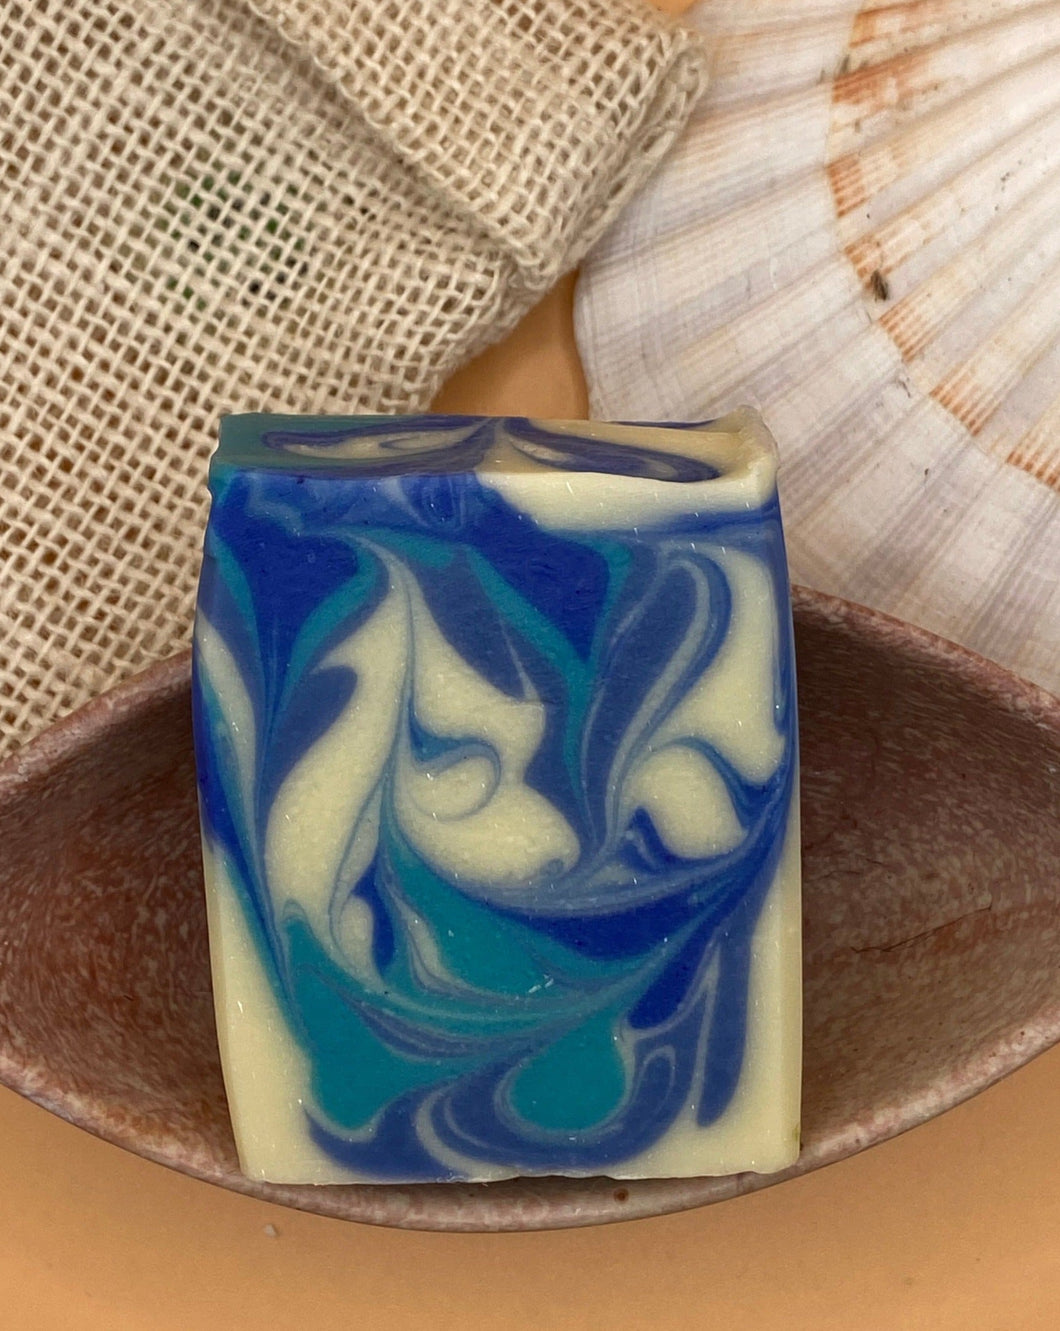 Gone to the beach soap. Hand and body soap  with all natural plant oils and butters good for your skin. This soap does not dry out your skin. Beautifully designed with 3 different blue colours in a nice design. It has a nice fresh fragrance reminding one of a scent from the sea. 